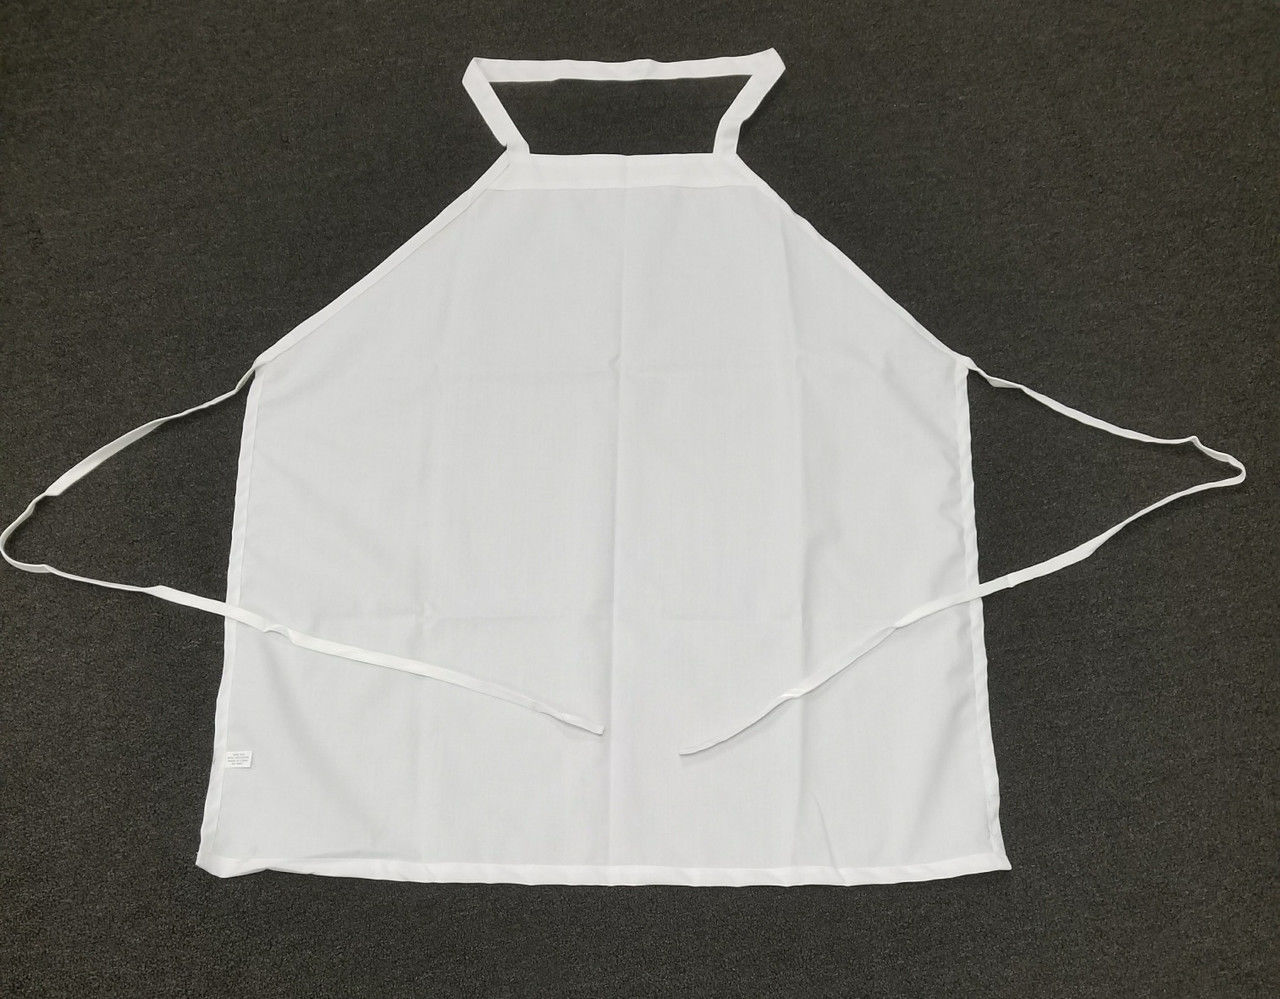 Are these white aprons with pockets suitable for kitchen or workshop use?